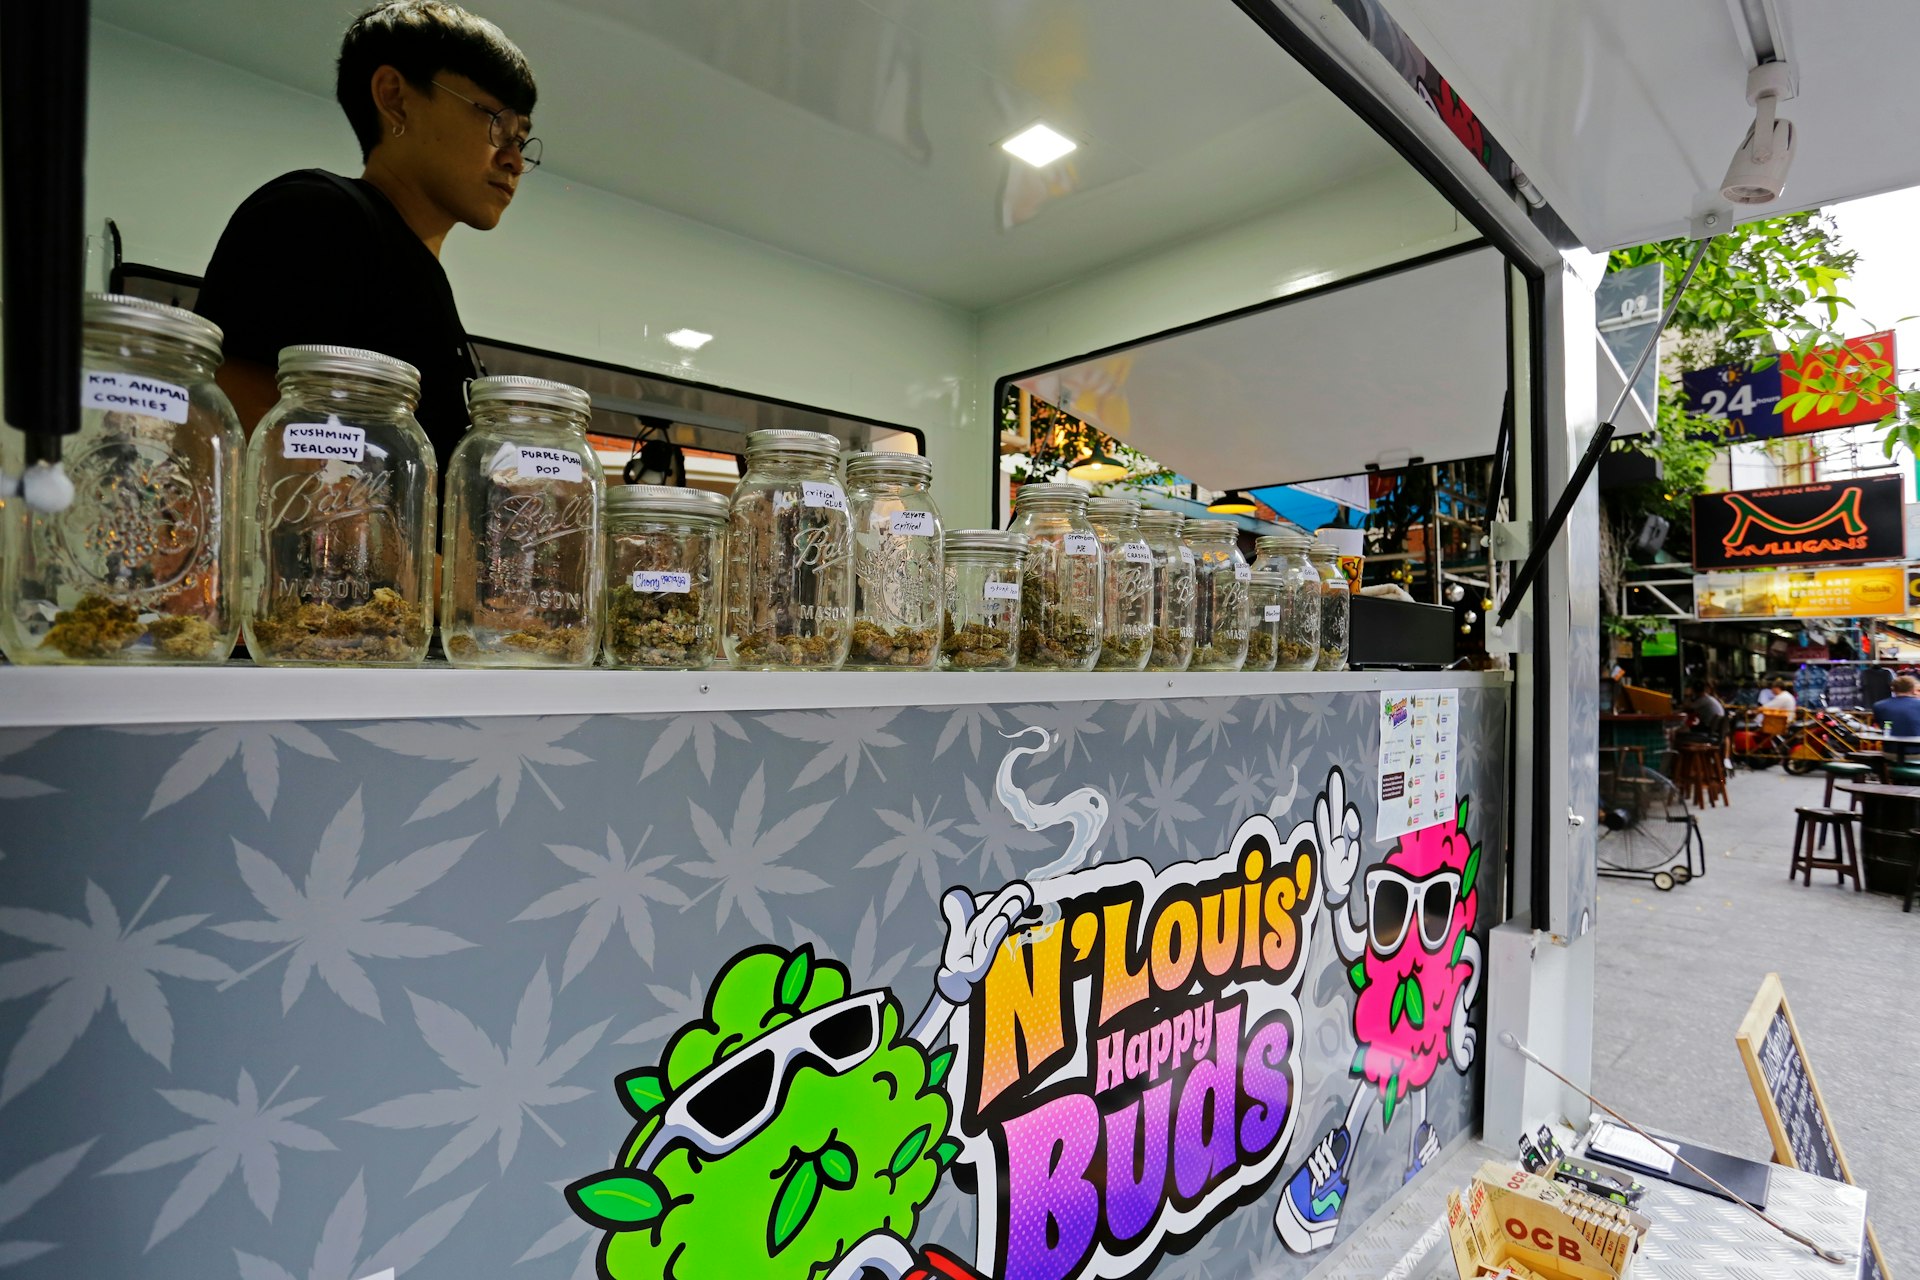 A cannabis pop-up truck at the iconic Khaosan Road